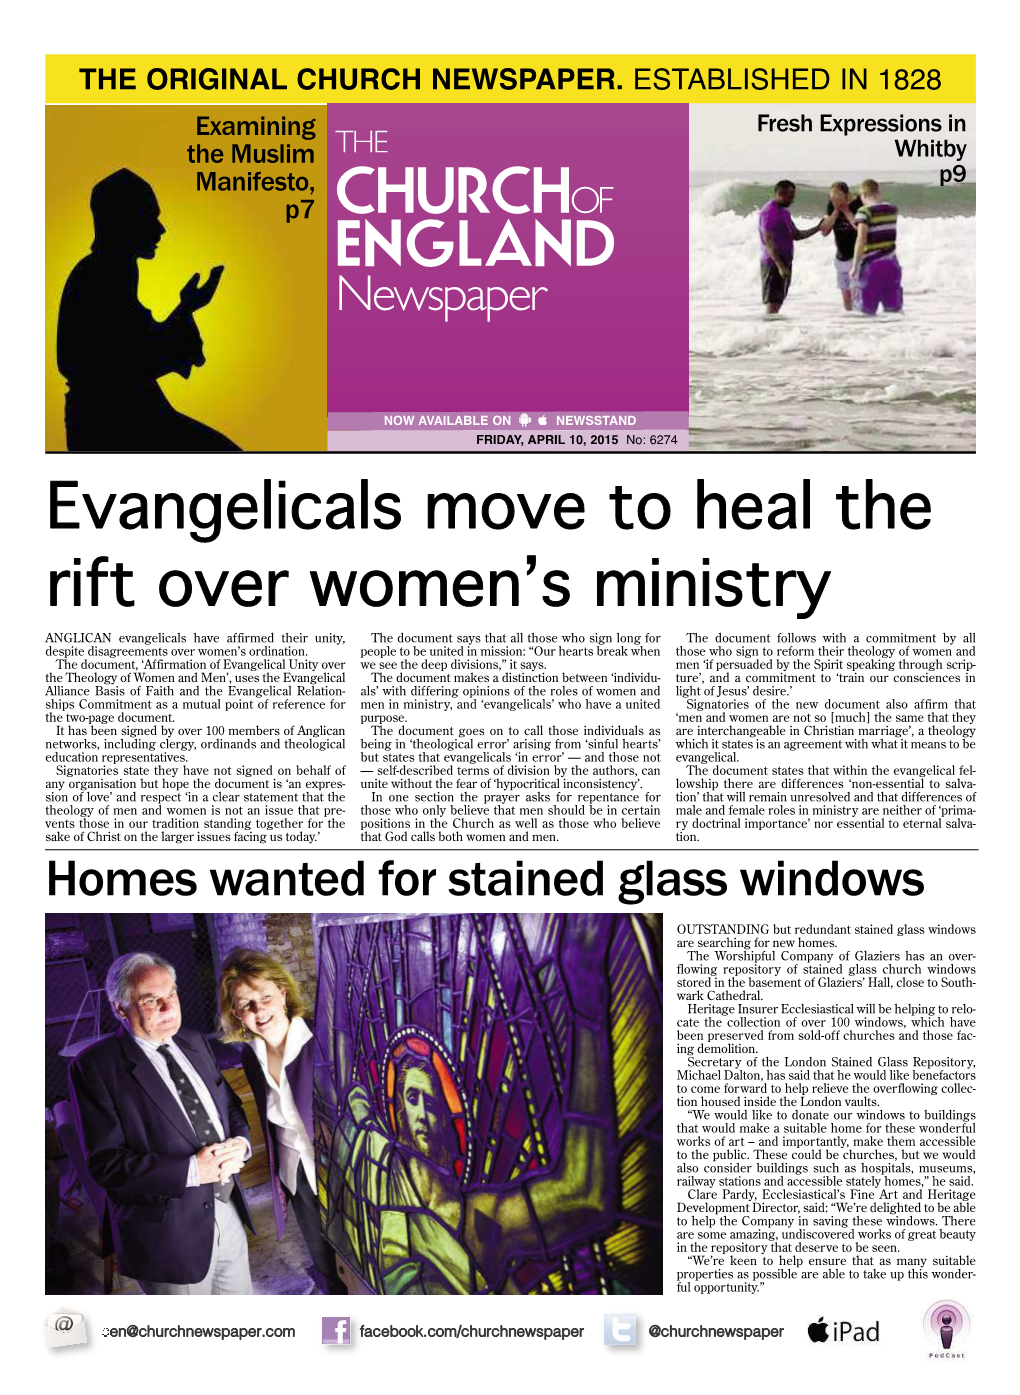 CHURCHOF ENGLAND Evangelicals Move to Heal the Rift Over Women's